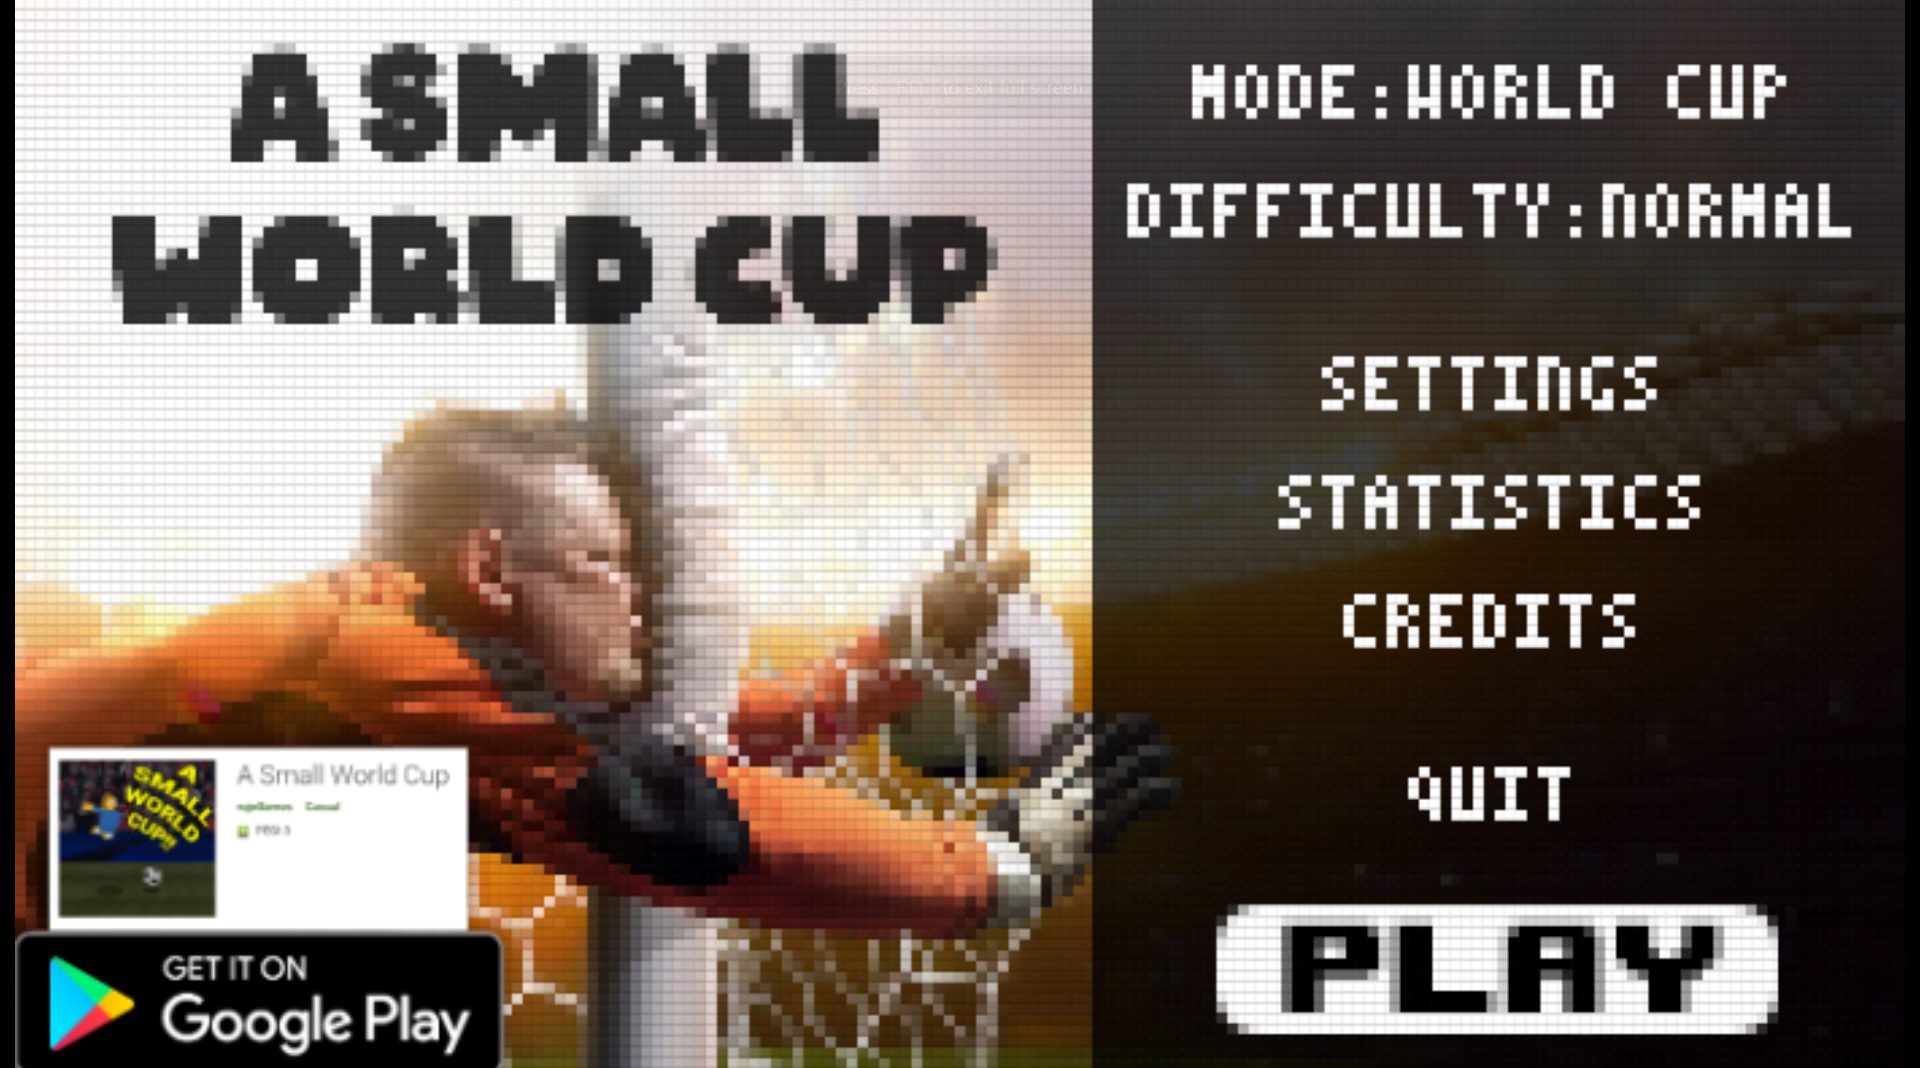 A Small World Cup<